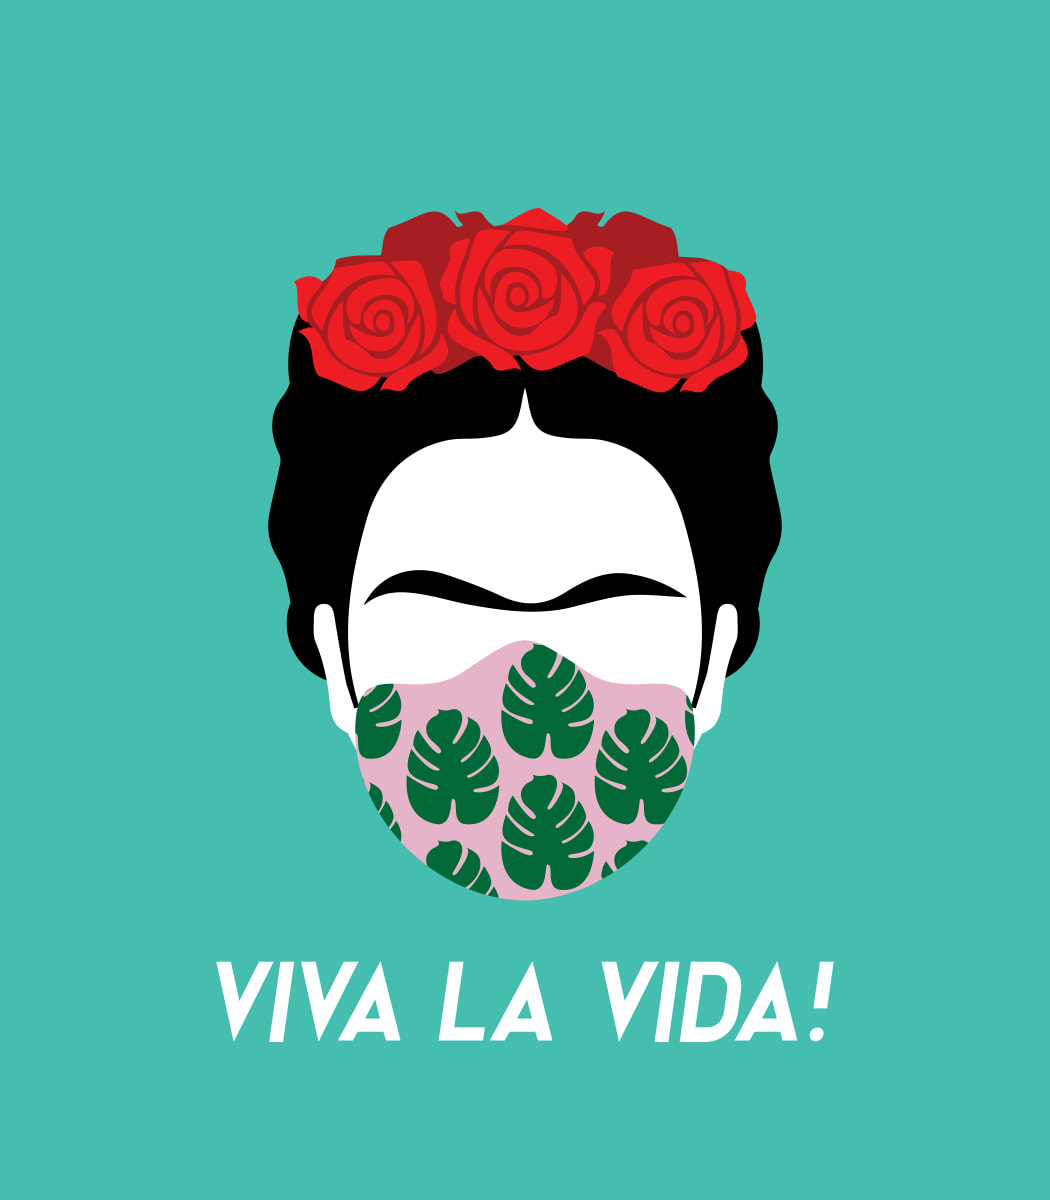 Mask PSA Campaign by Bernice Merced  Image: Design + Illustration for art prints, T-shirts, and other print novelties to encourage face mask usage during the COVID 19 pandemic.
